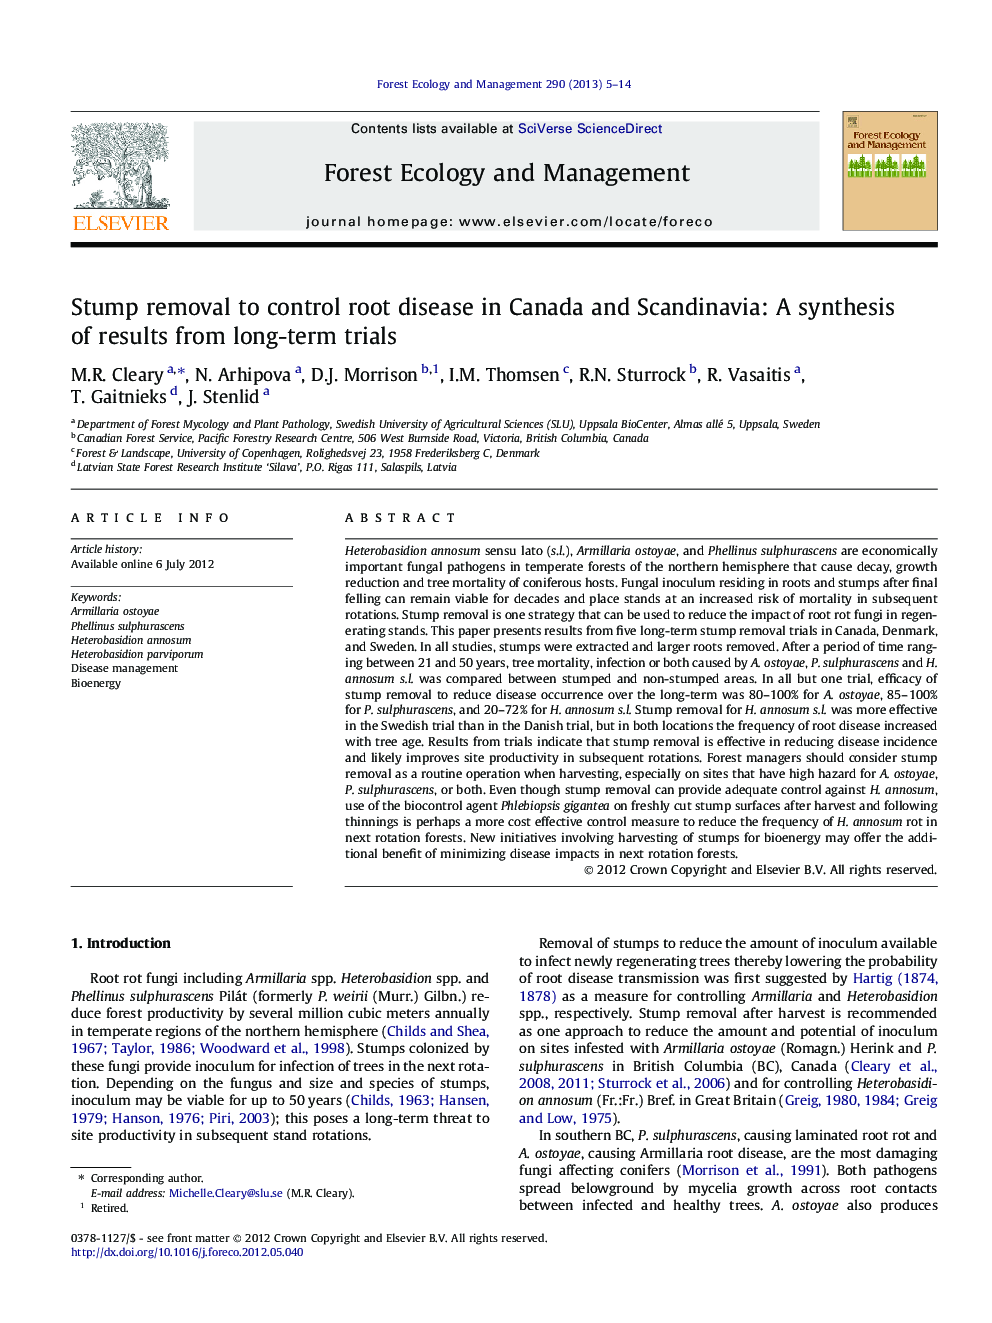 Stump removal to control root disease in Canada and Scandinavia: A synthesis of results from long-term trials